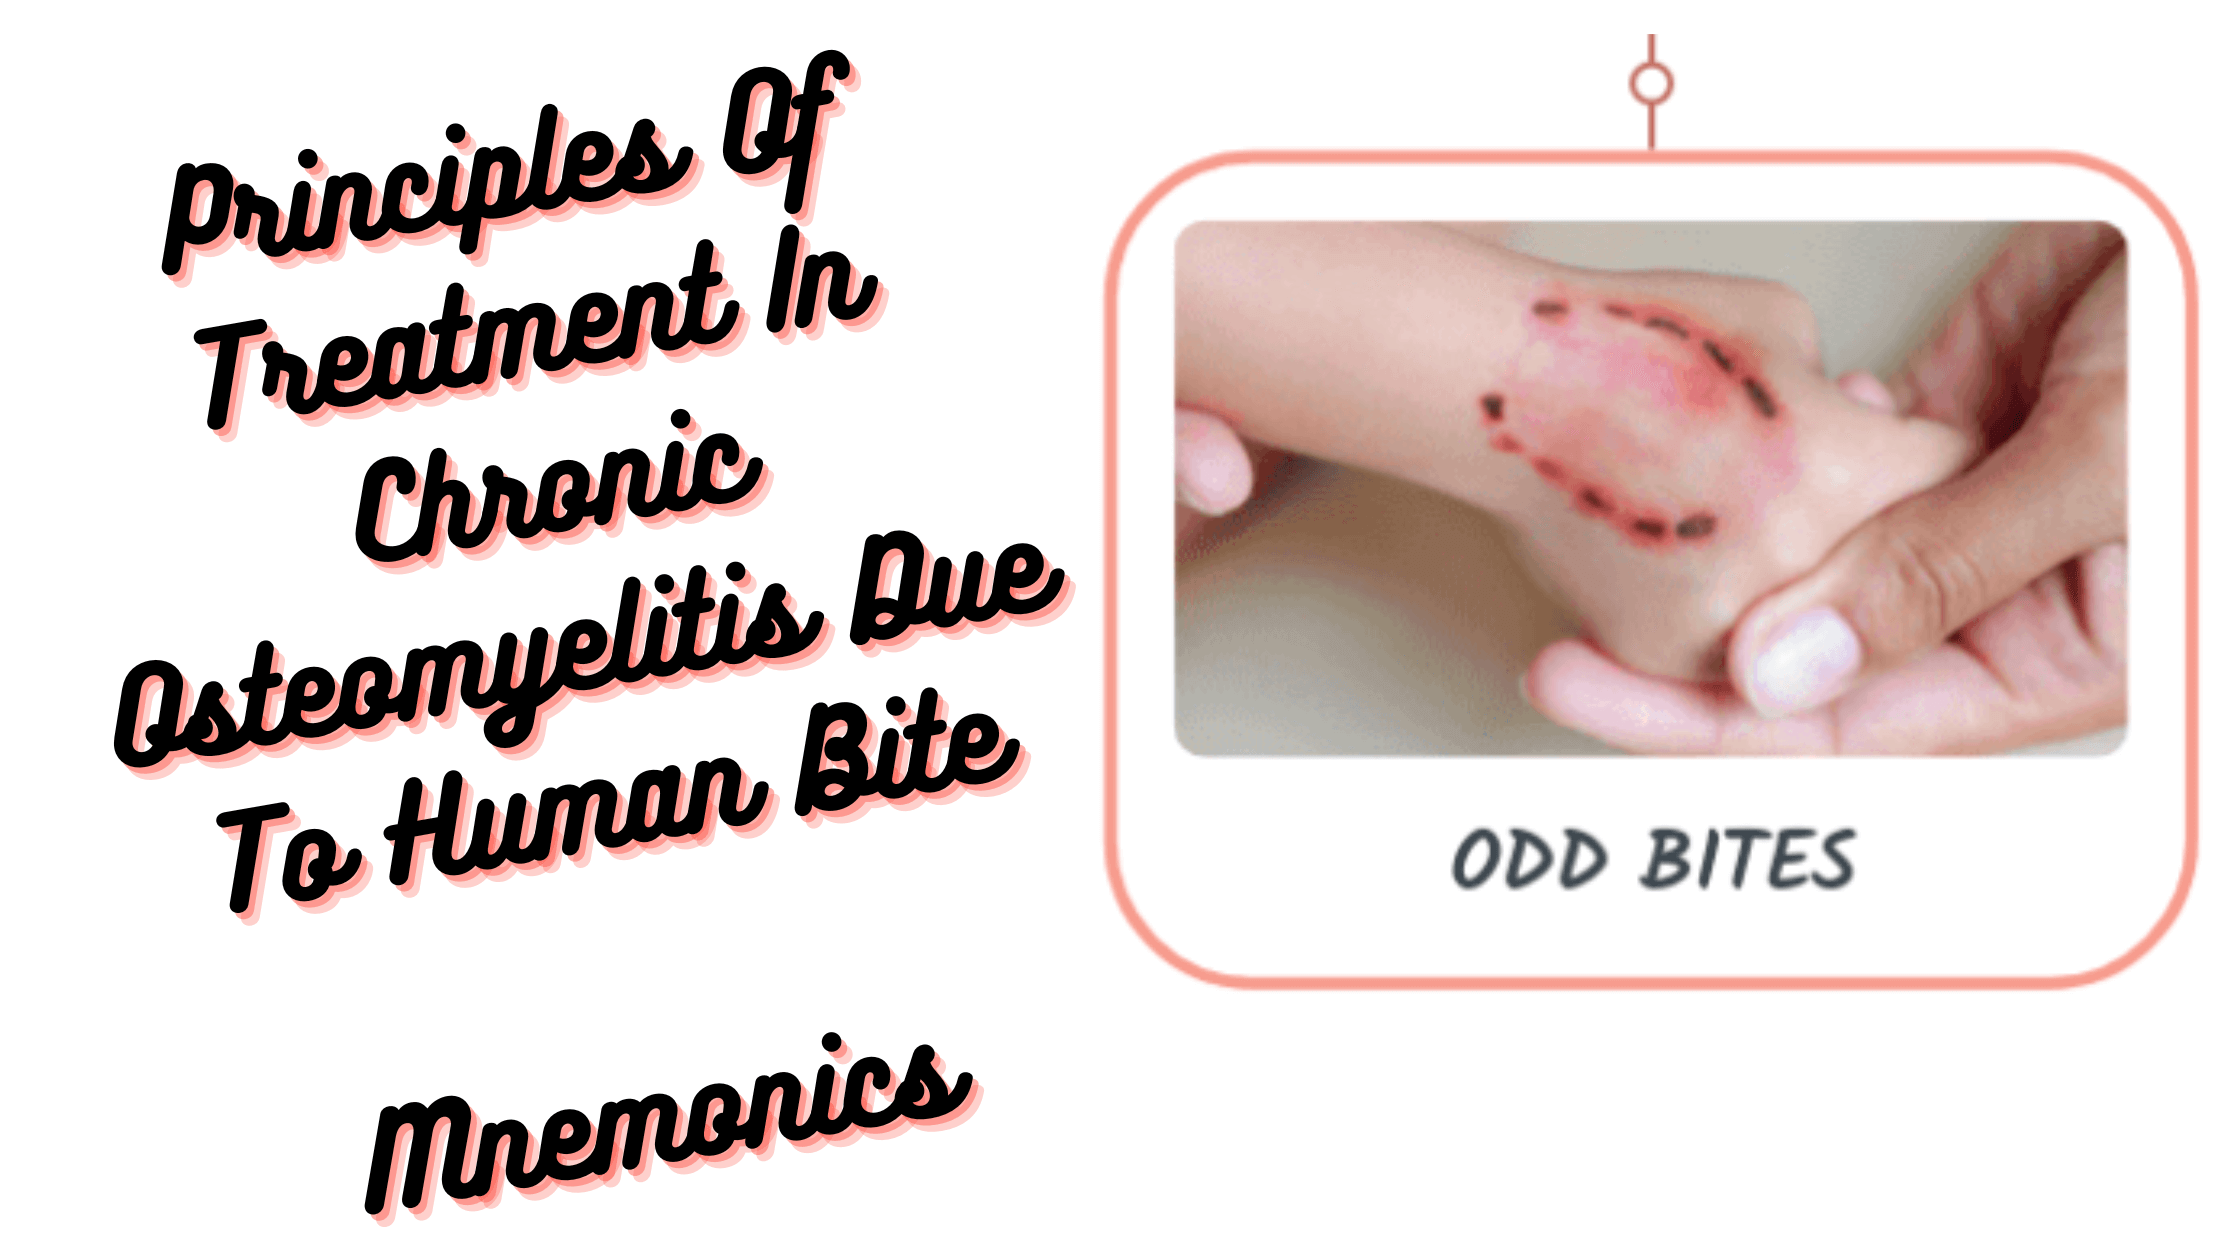 You are currently viewing Mnemonic: Chronic Osteomyelitis Treatment Secondary to Human Bite